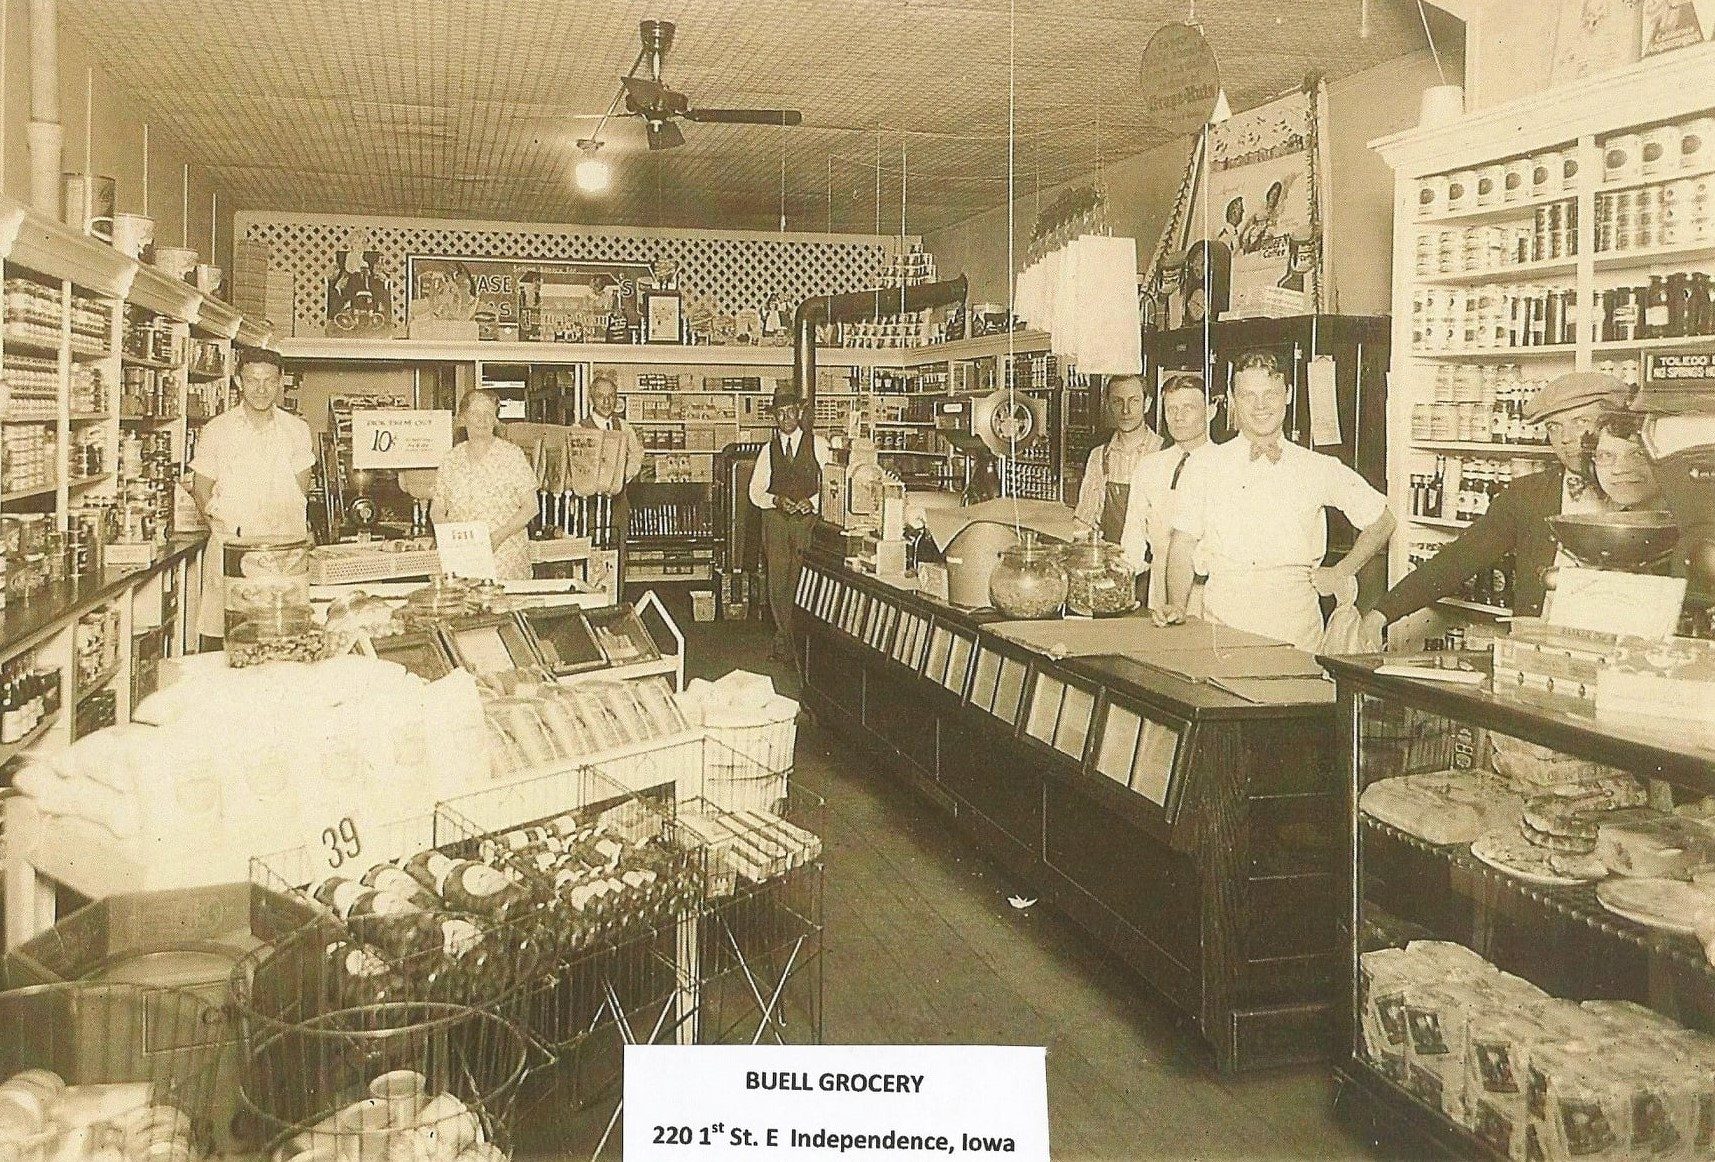 Buell Grocery - 220 1st St E - approximately where Two Brothers Restaurant was.